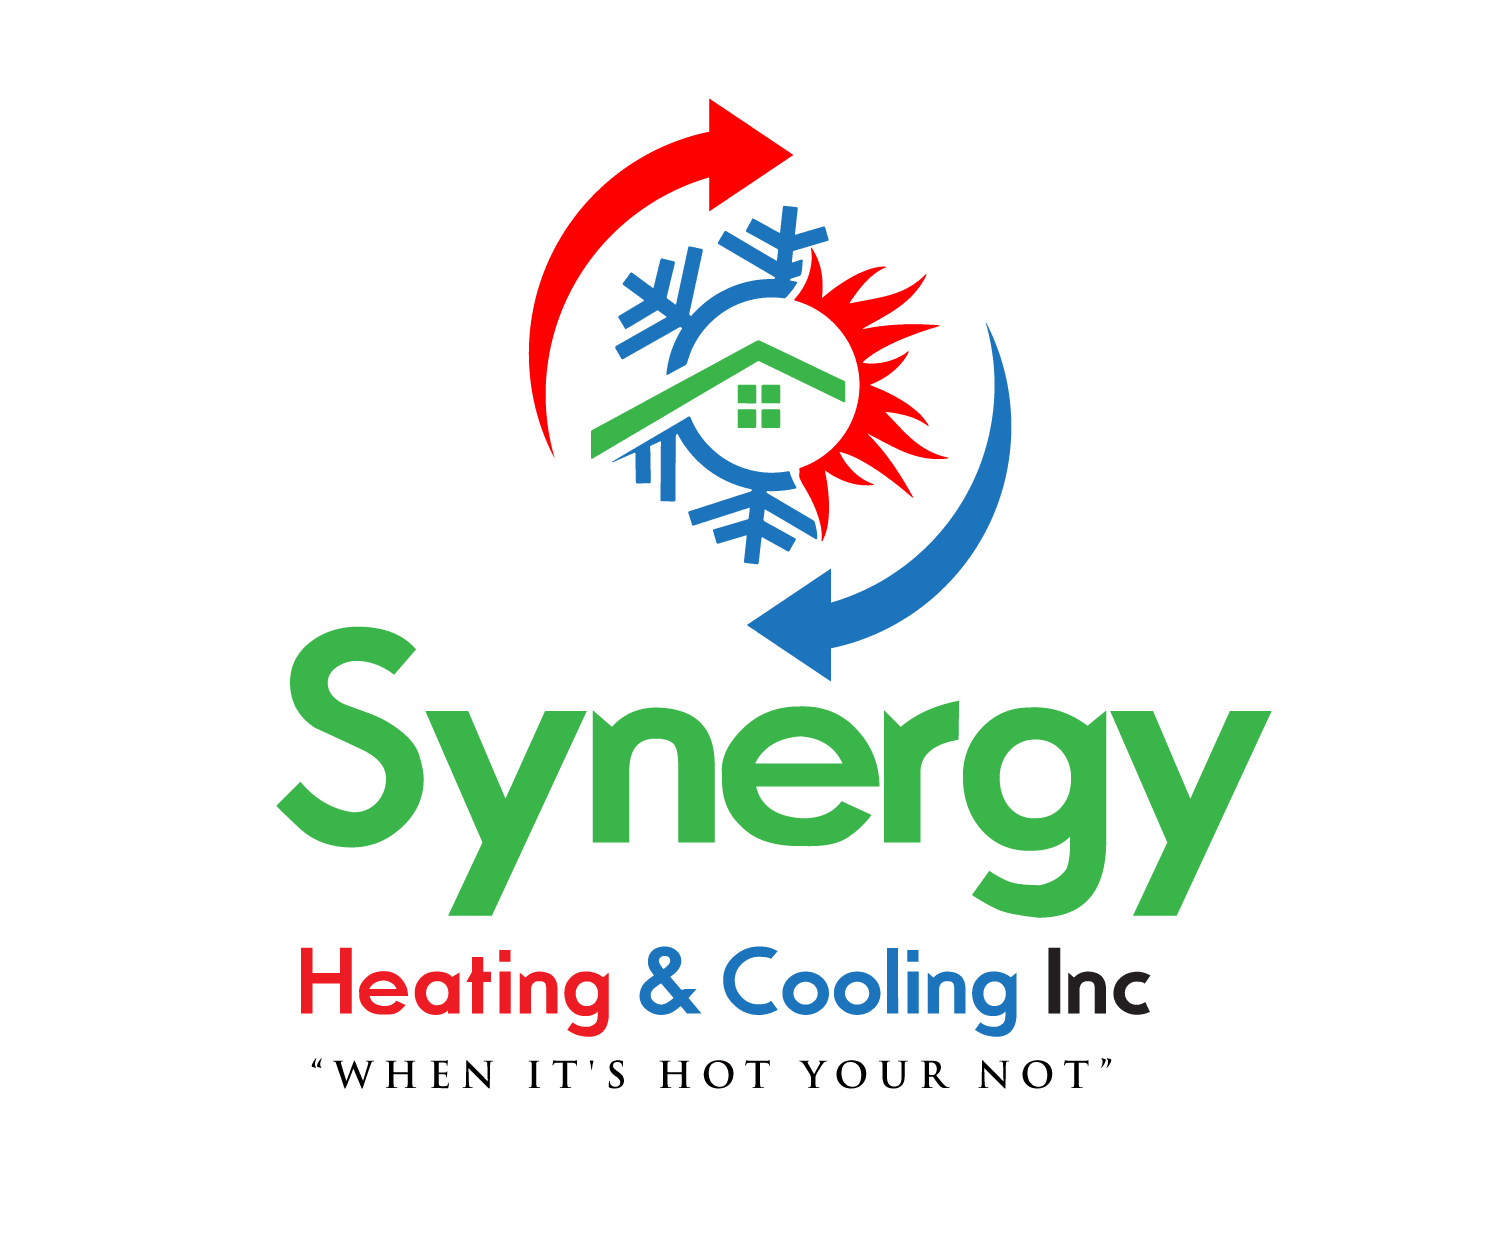 About Synergy Heating and Cooling Inc